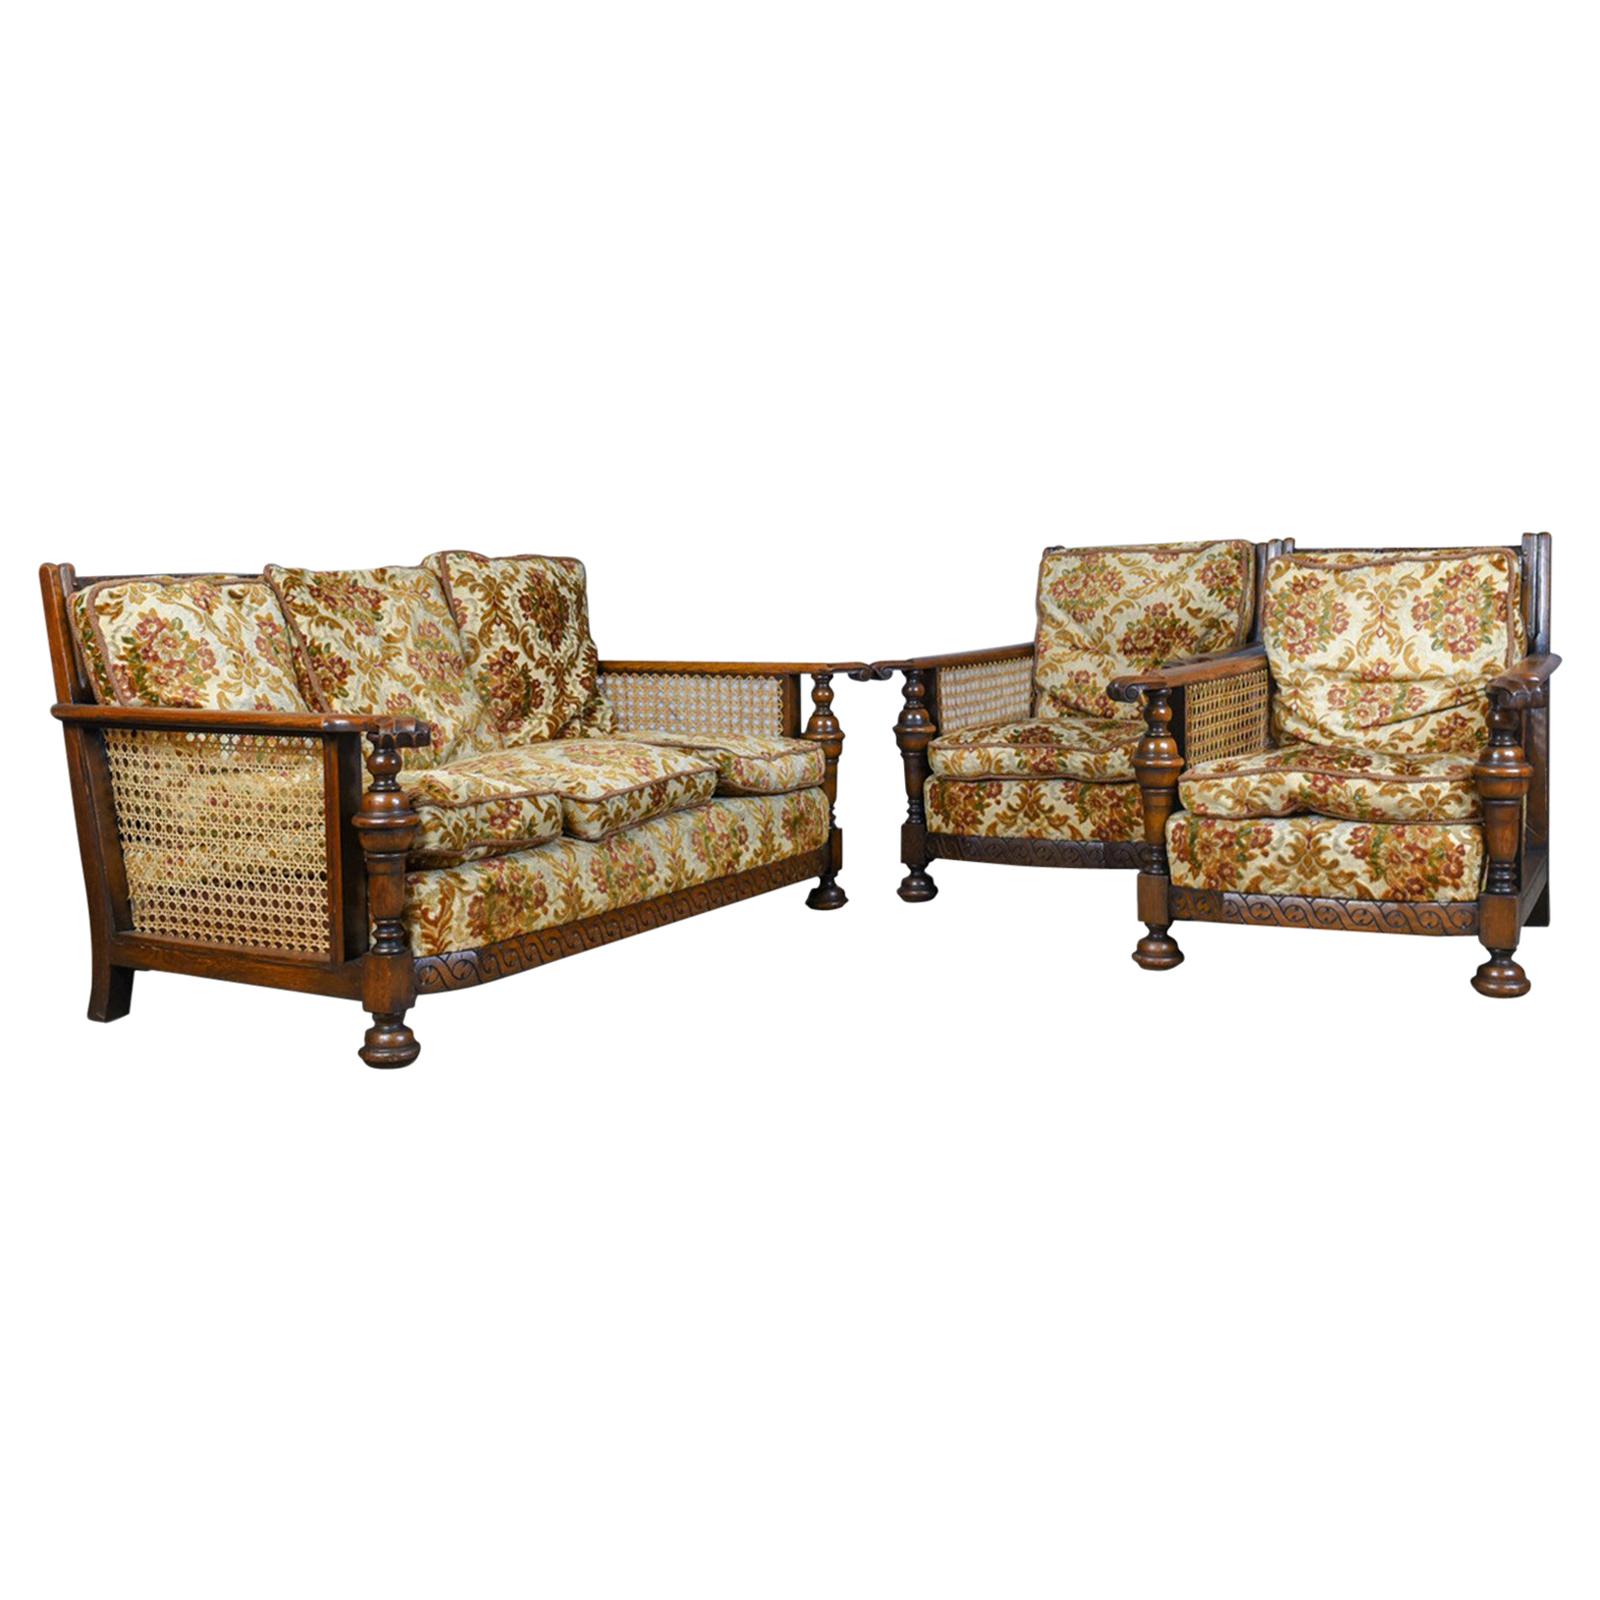 Antique Conservatory Suite, Oak, Bergere, Three-Seat Sofa, Two Chairs